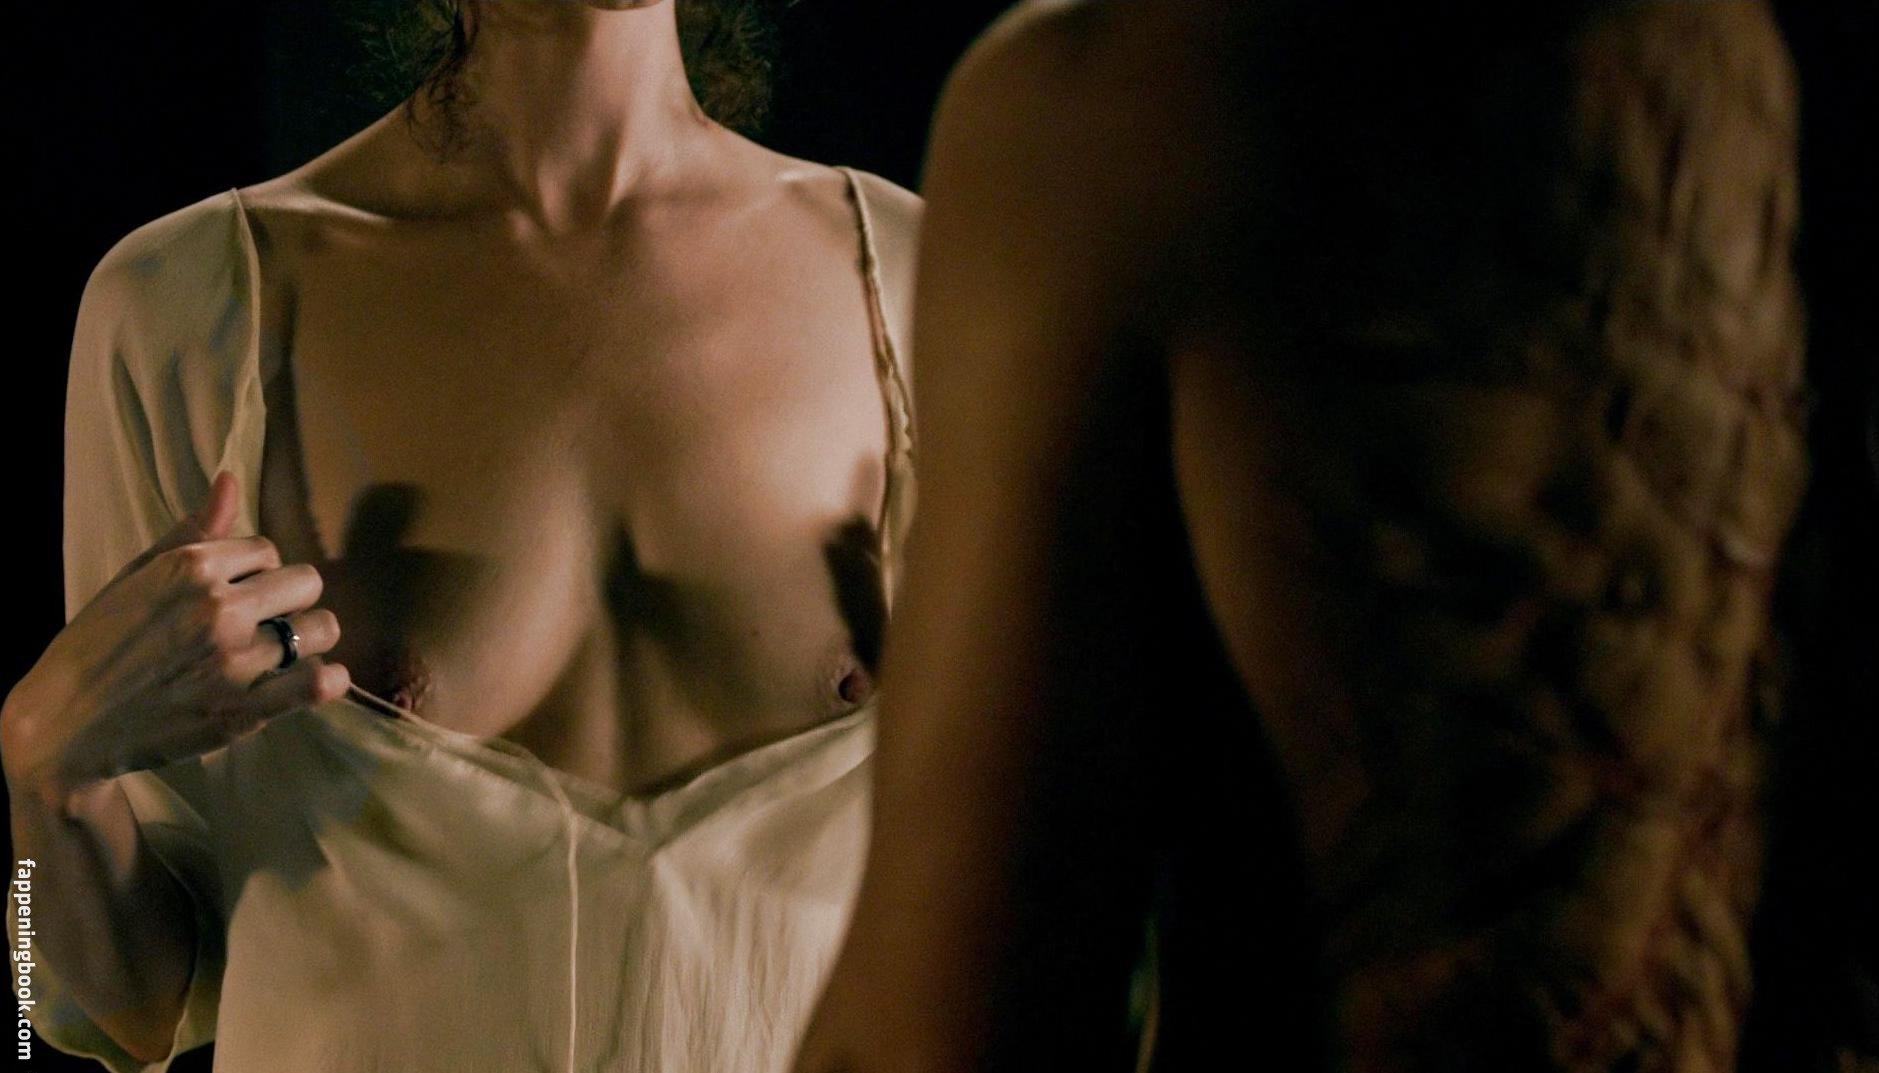 Caitriona Balfe Nude, The Fappening - Photo #92693 - FappeningBook.